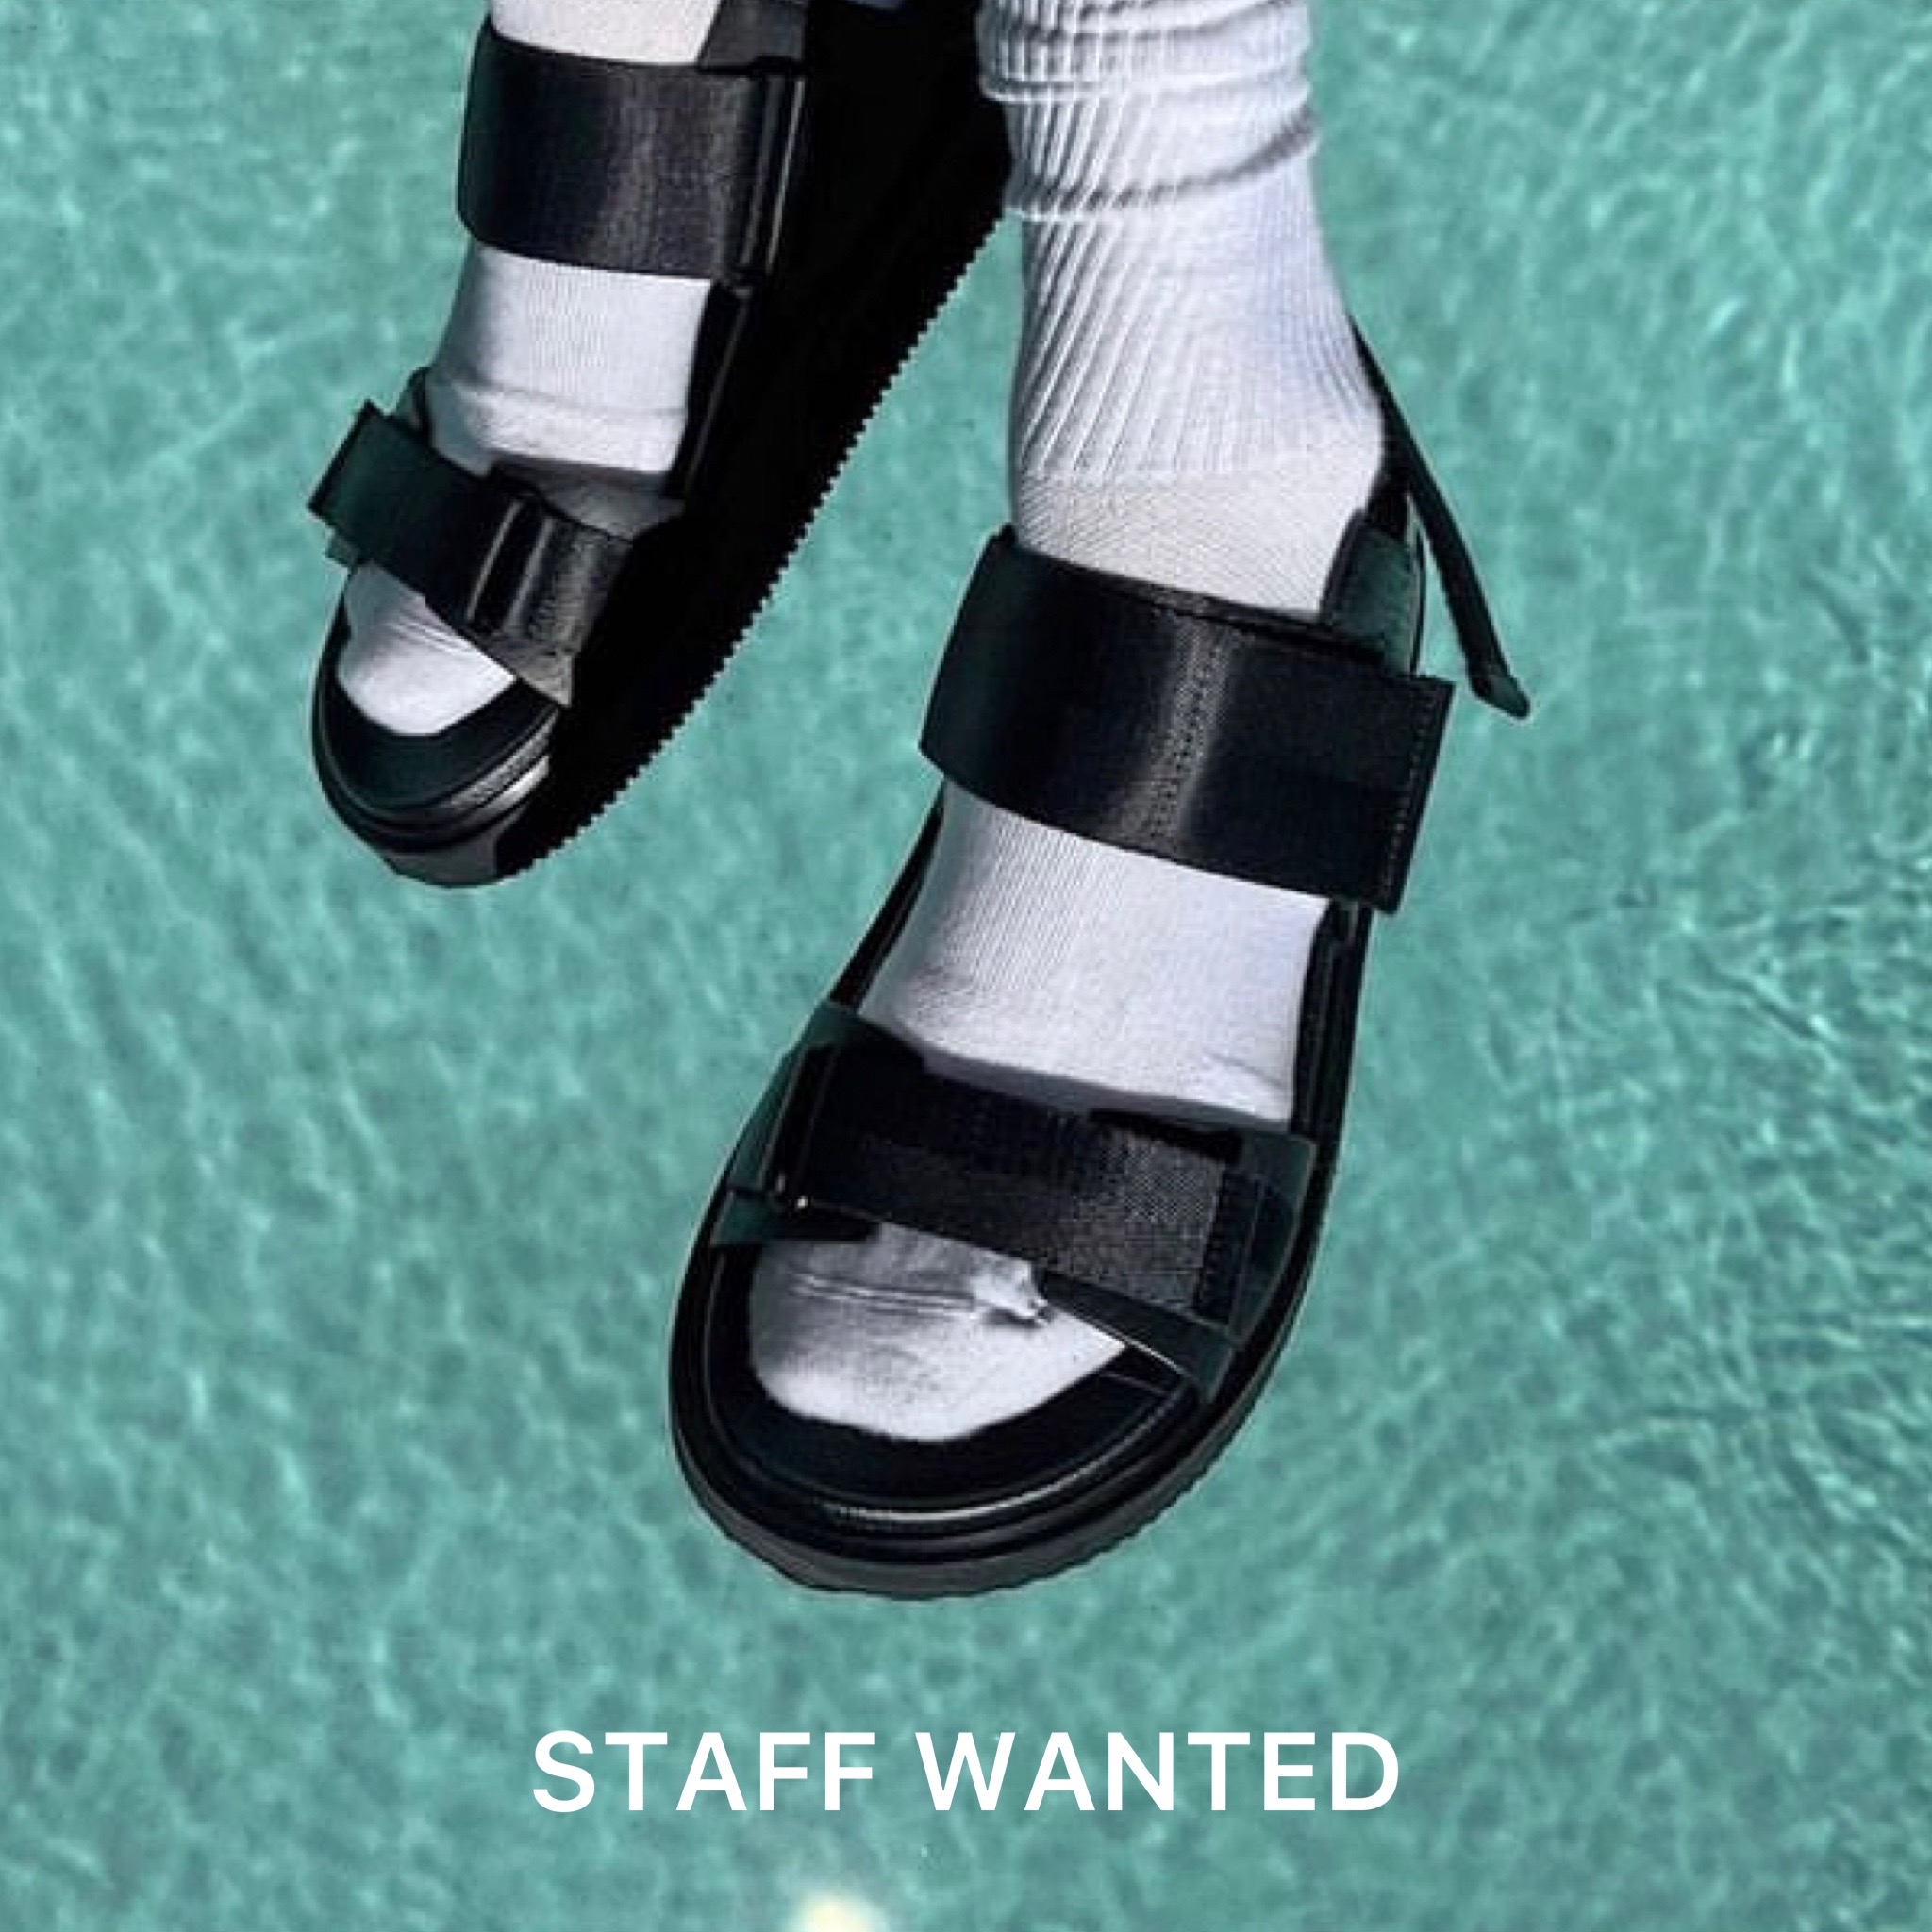 ［STAFF WANTED］